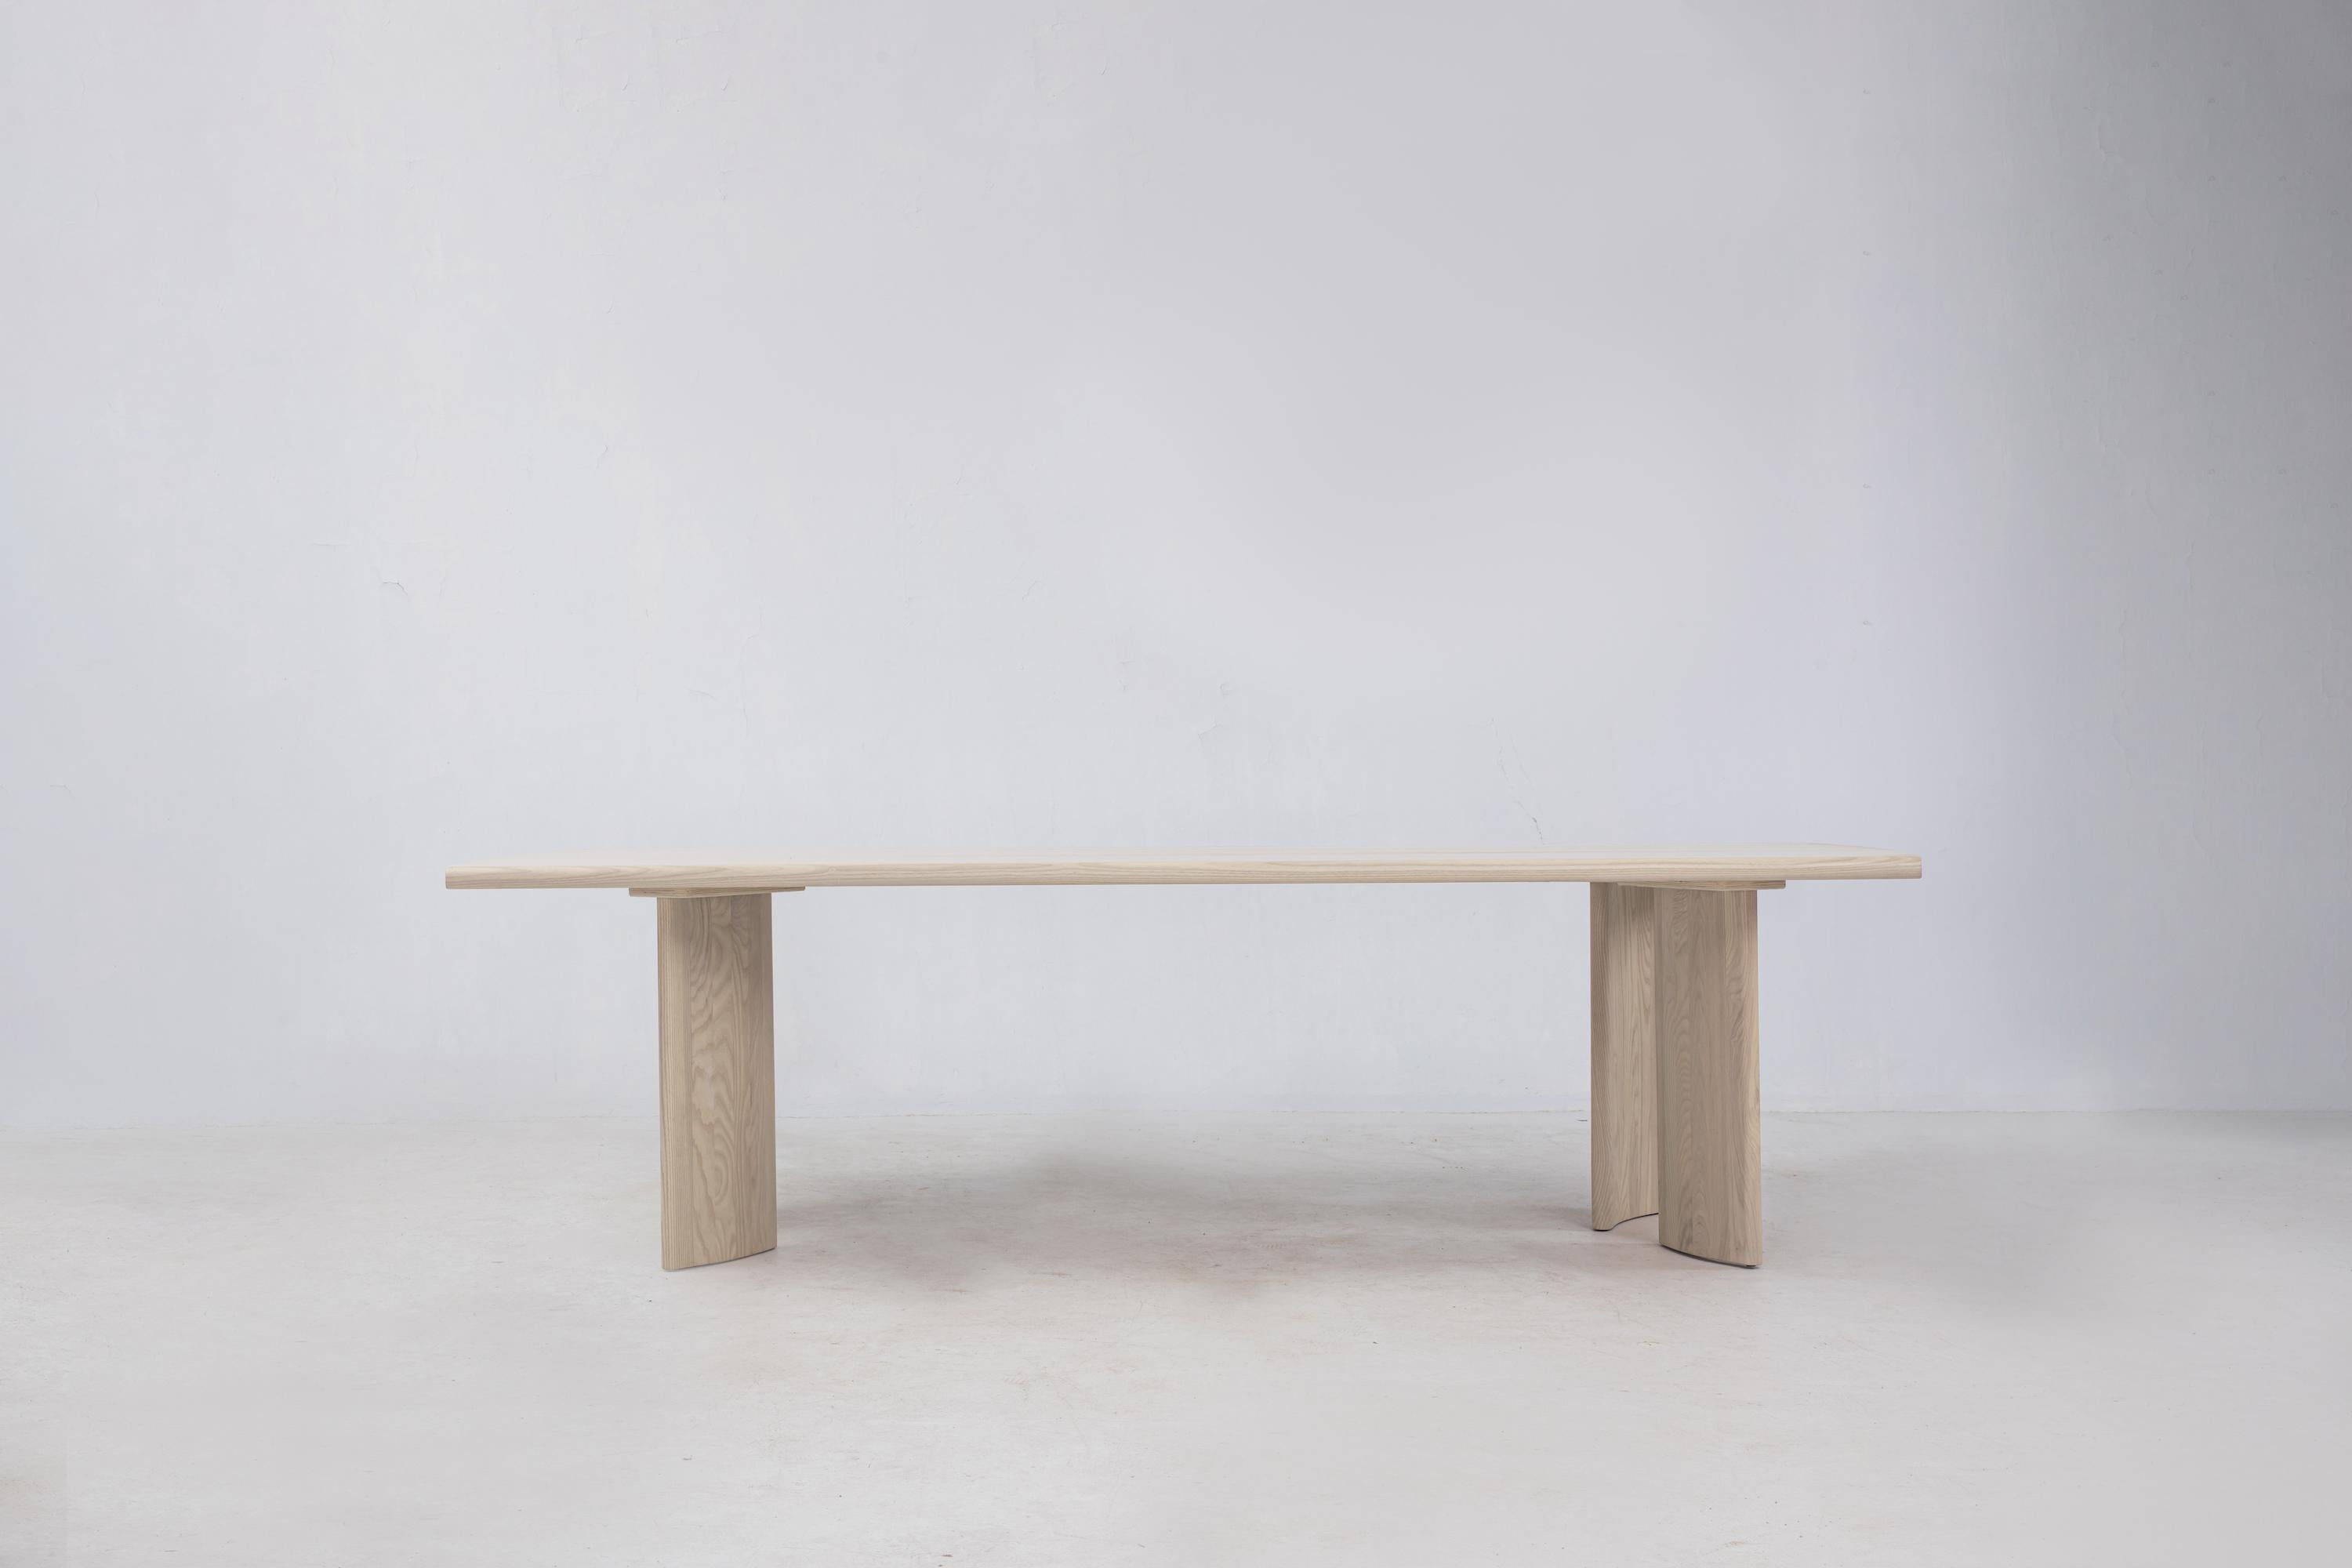 The Crest Table is our solid slab dining table made from FSC white ash. The heavy, solid wood slab is set on curved, offset columnar legs. We’ve designed this piece with legs detached for easy moving.

This table is designed around the concept of a